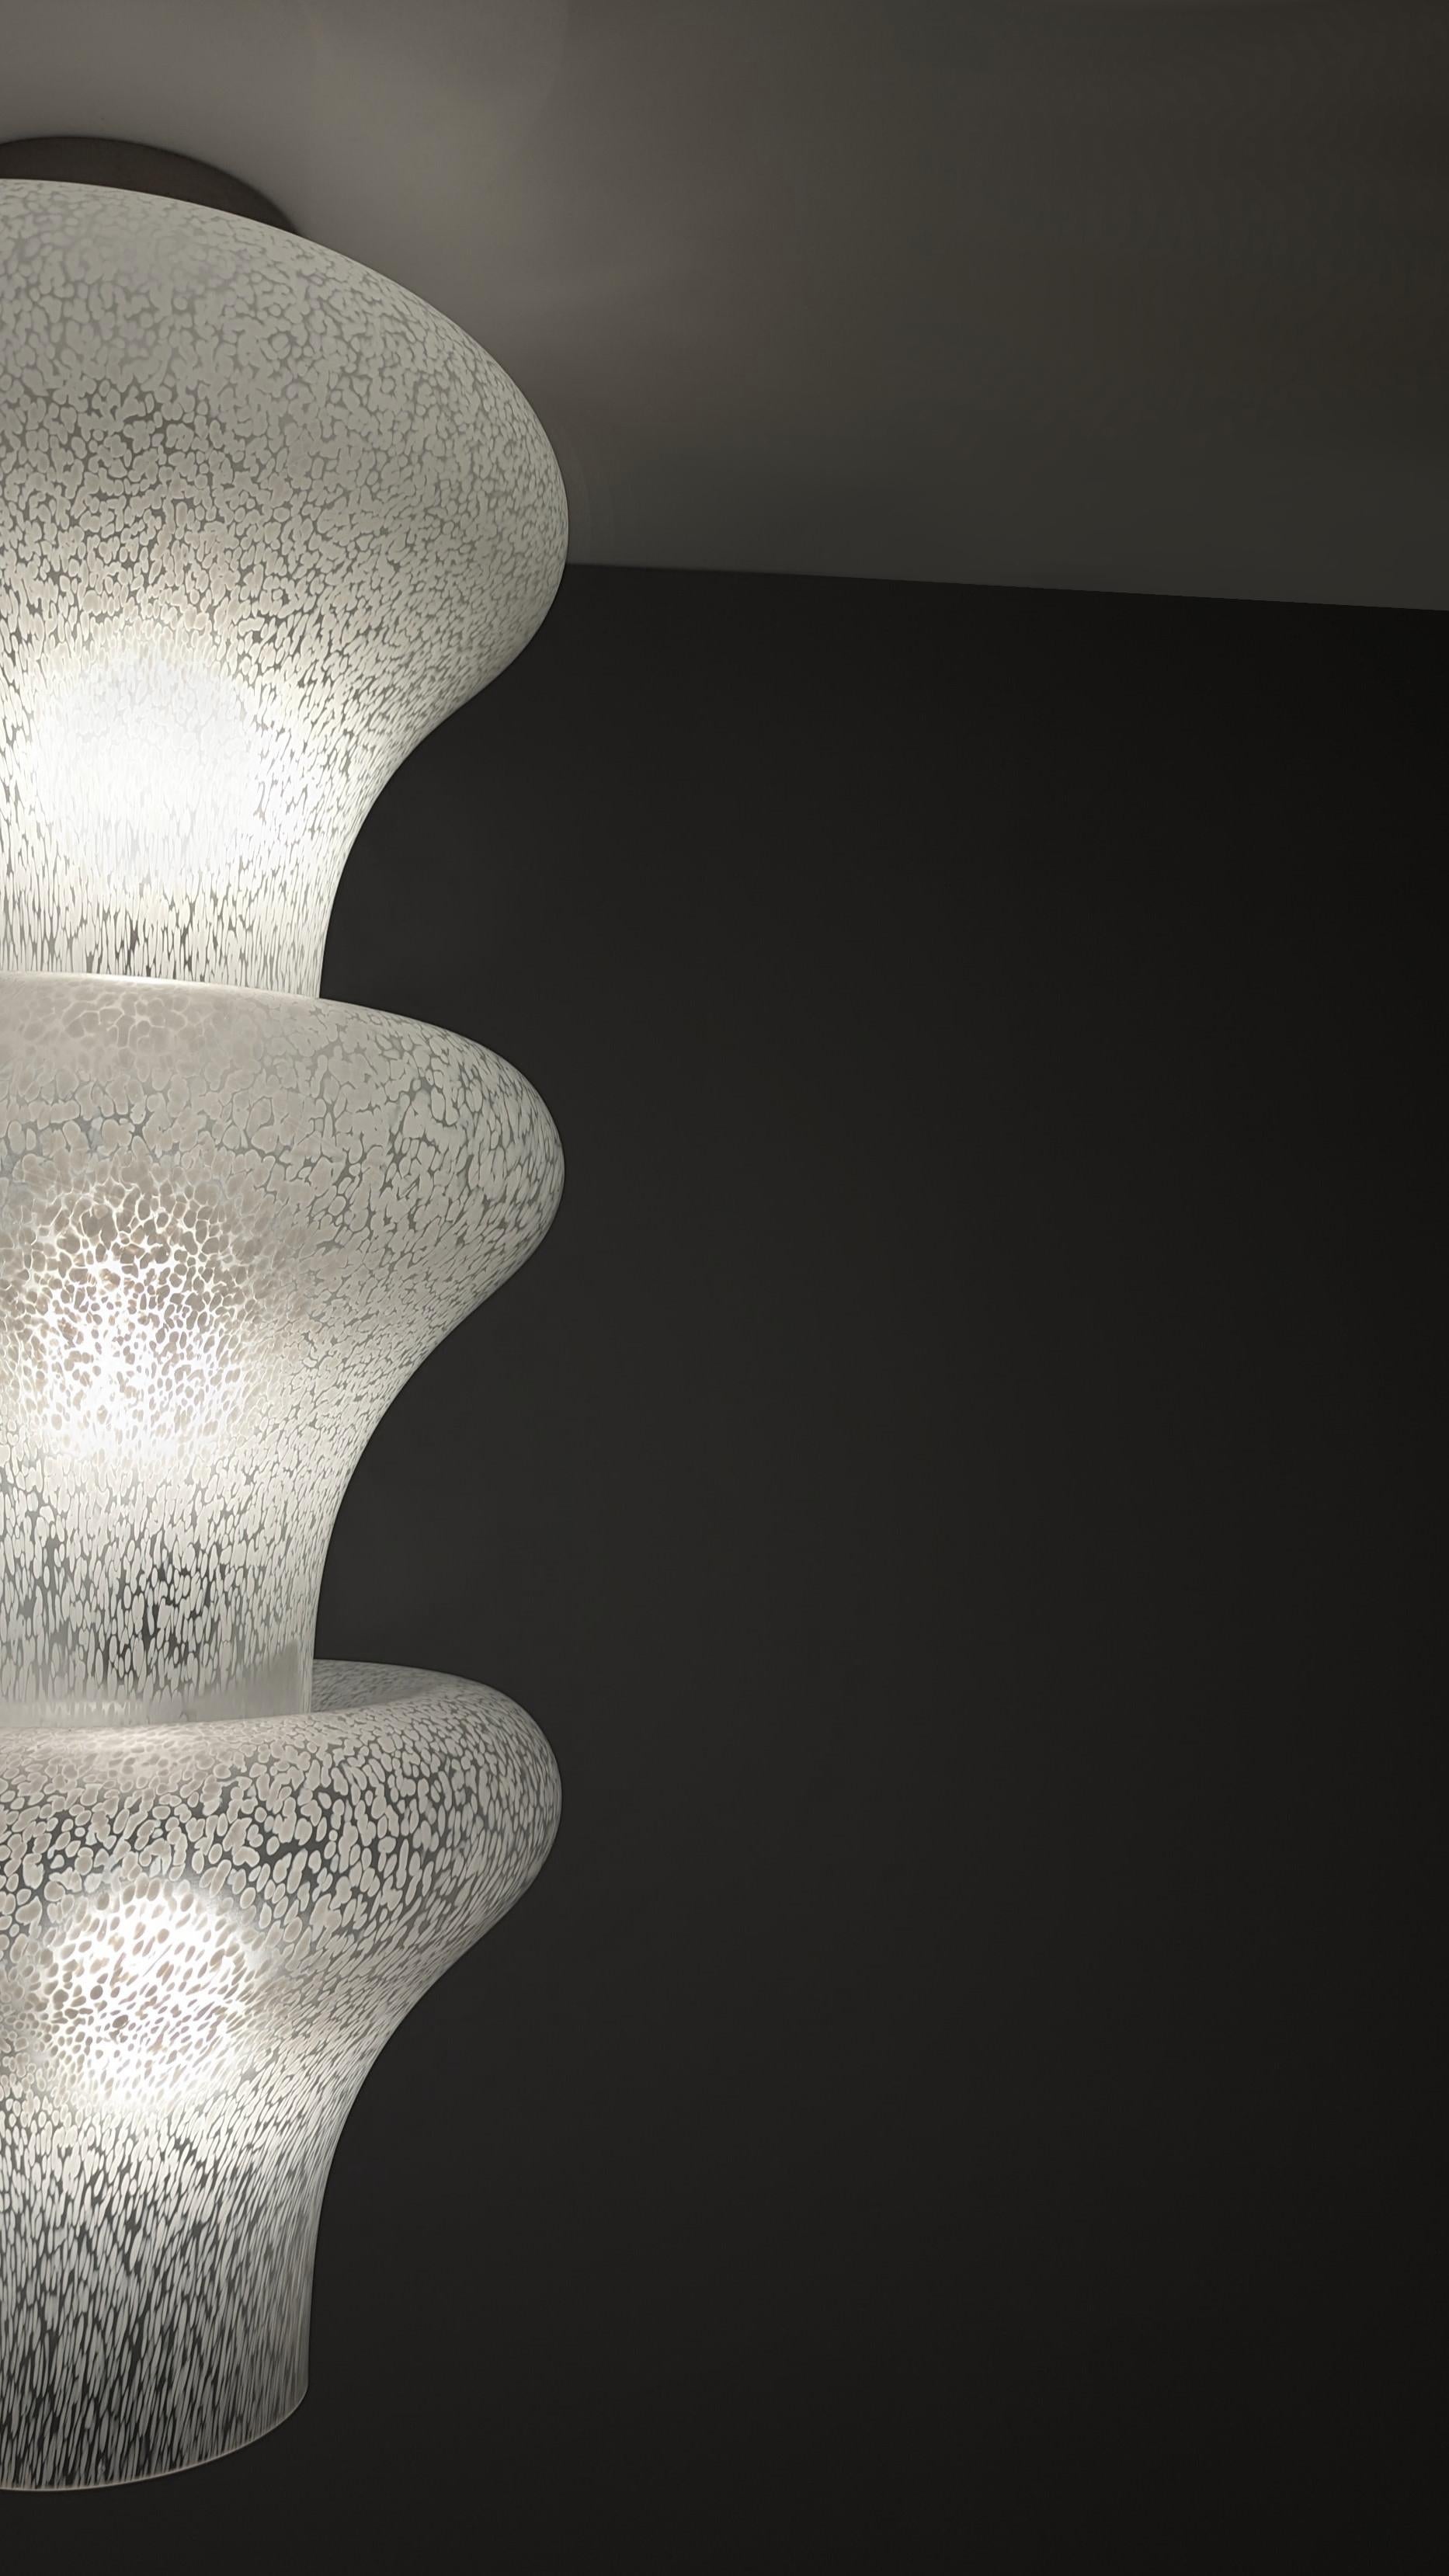 Great lamp by designer and glass genius Carlo Nason for Mazzega. We are looking at one of the most exclusive and refined lighting pieces by the Italian artist. A work of beautiful white mottled Murano blown glass with a beautifully curved